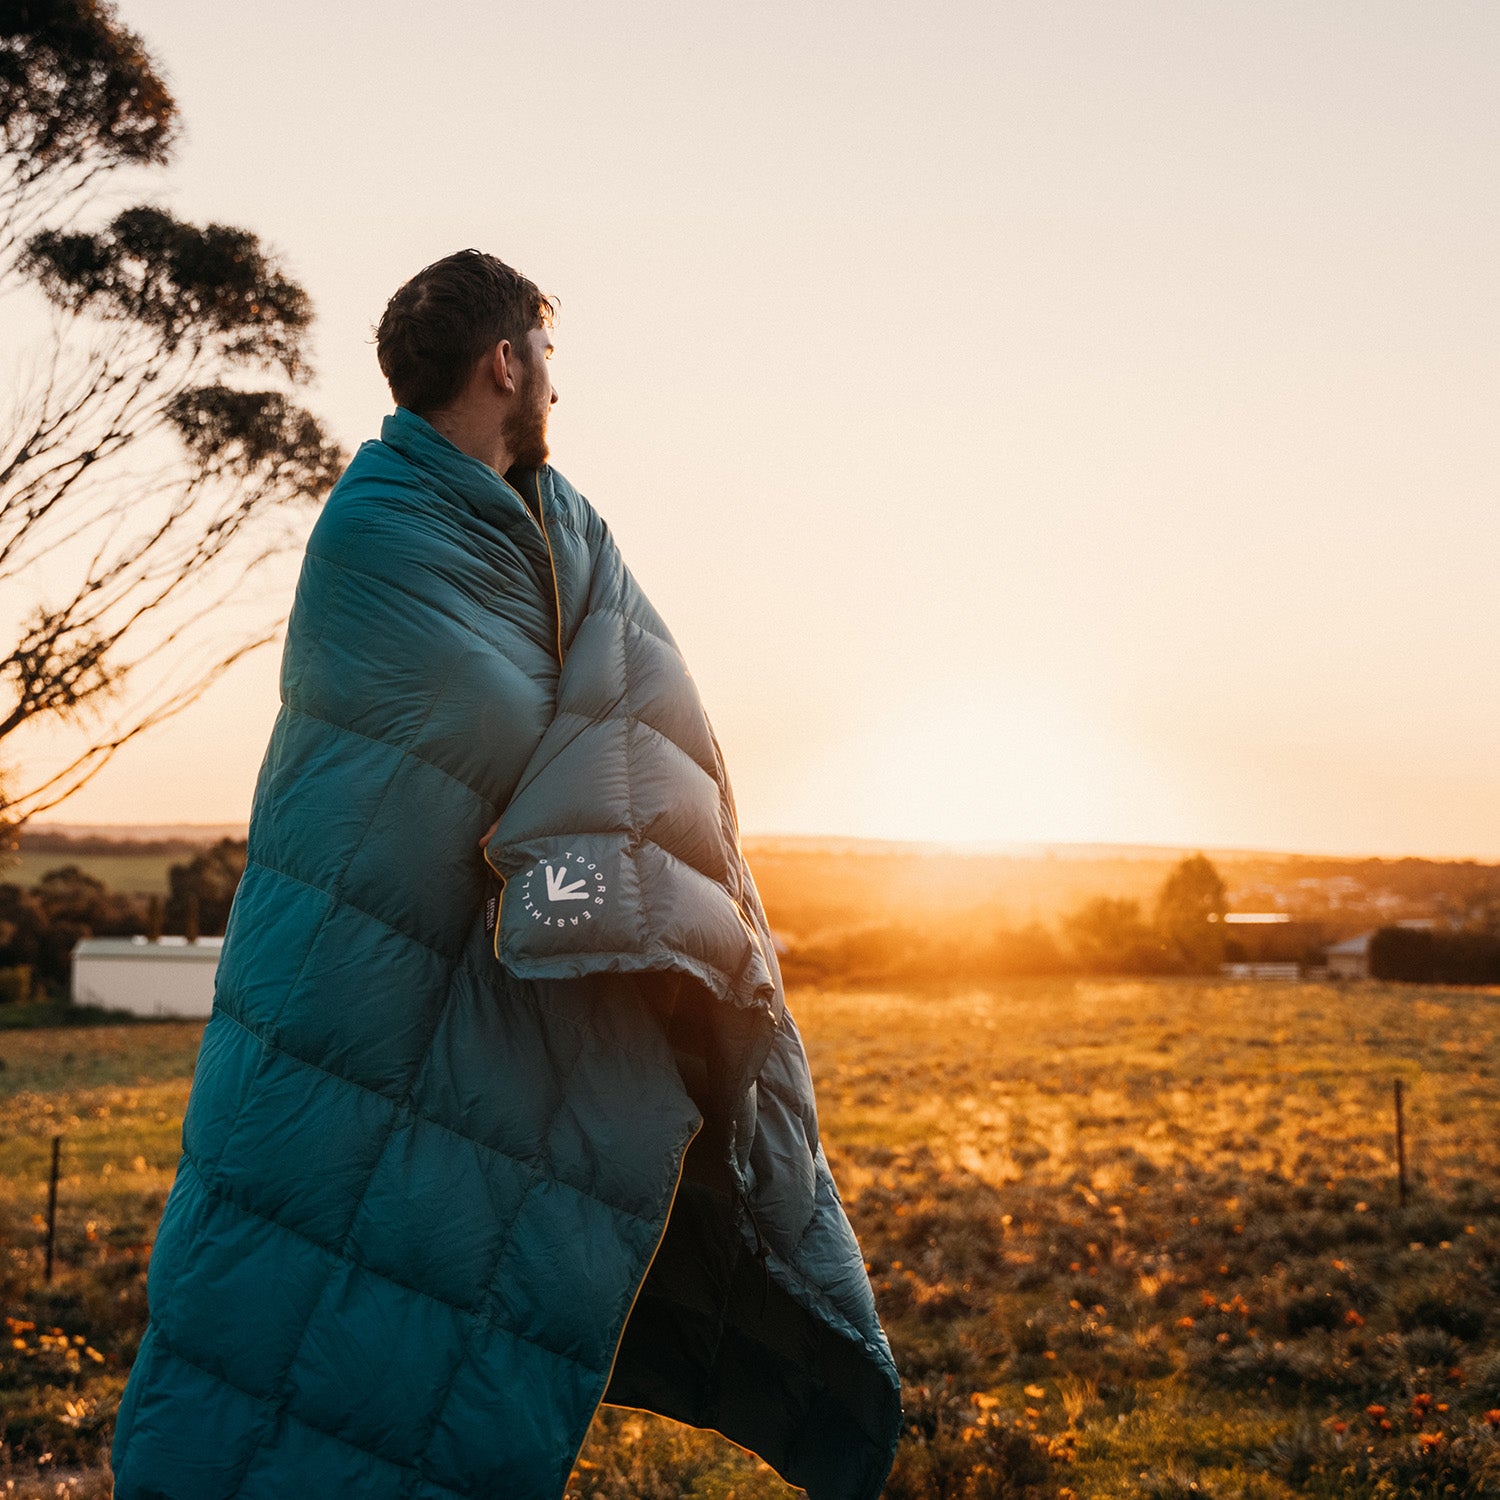 Down Puffy Camping Blanket